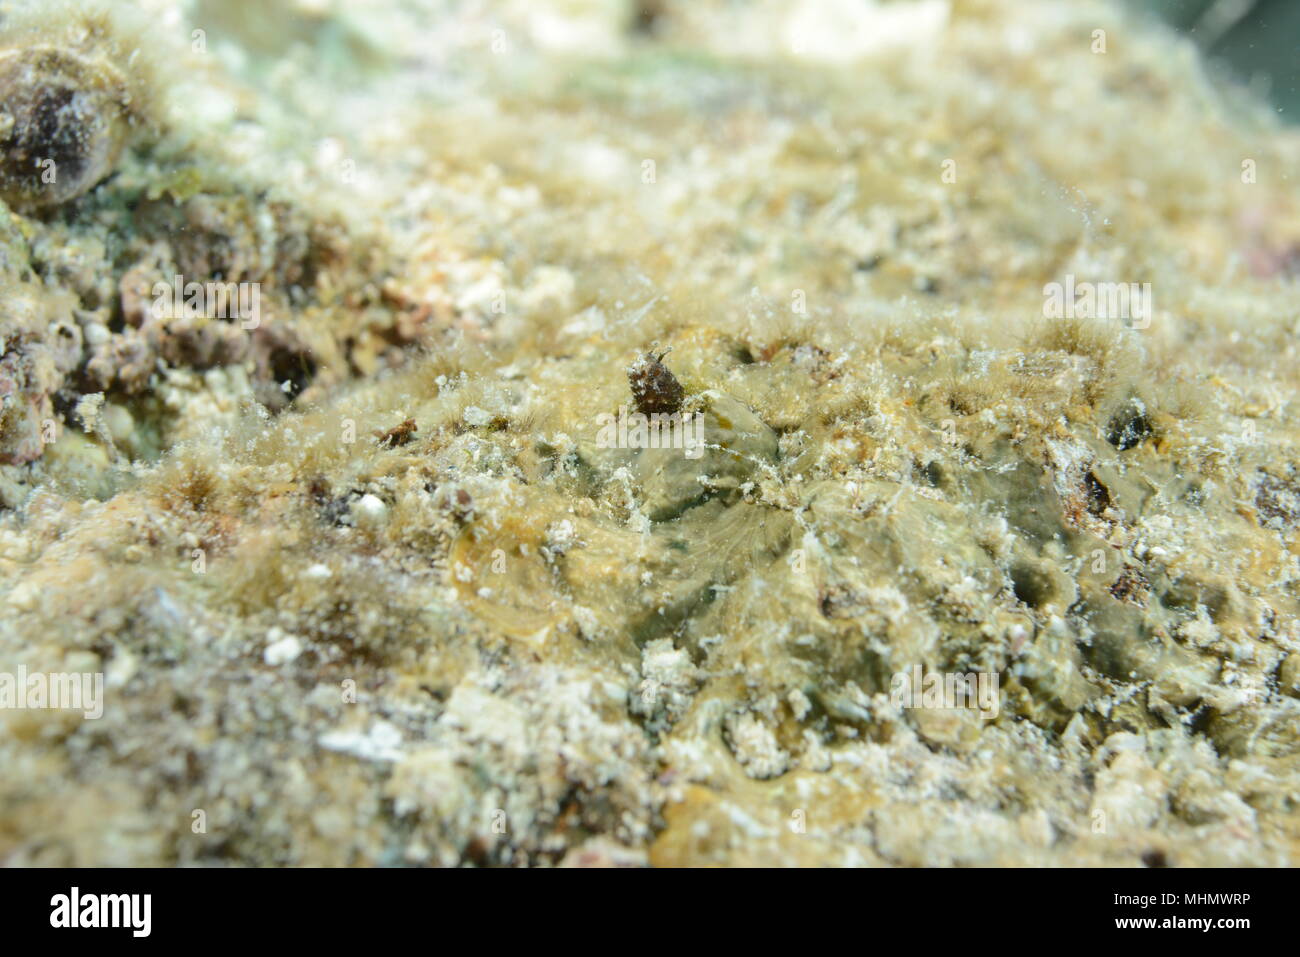 Goby fish close up portrait while scuba diving Stock Photo